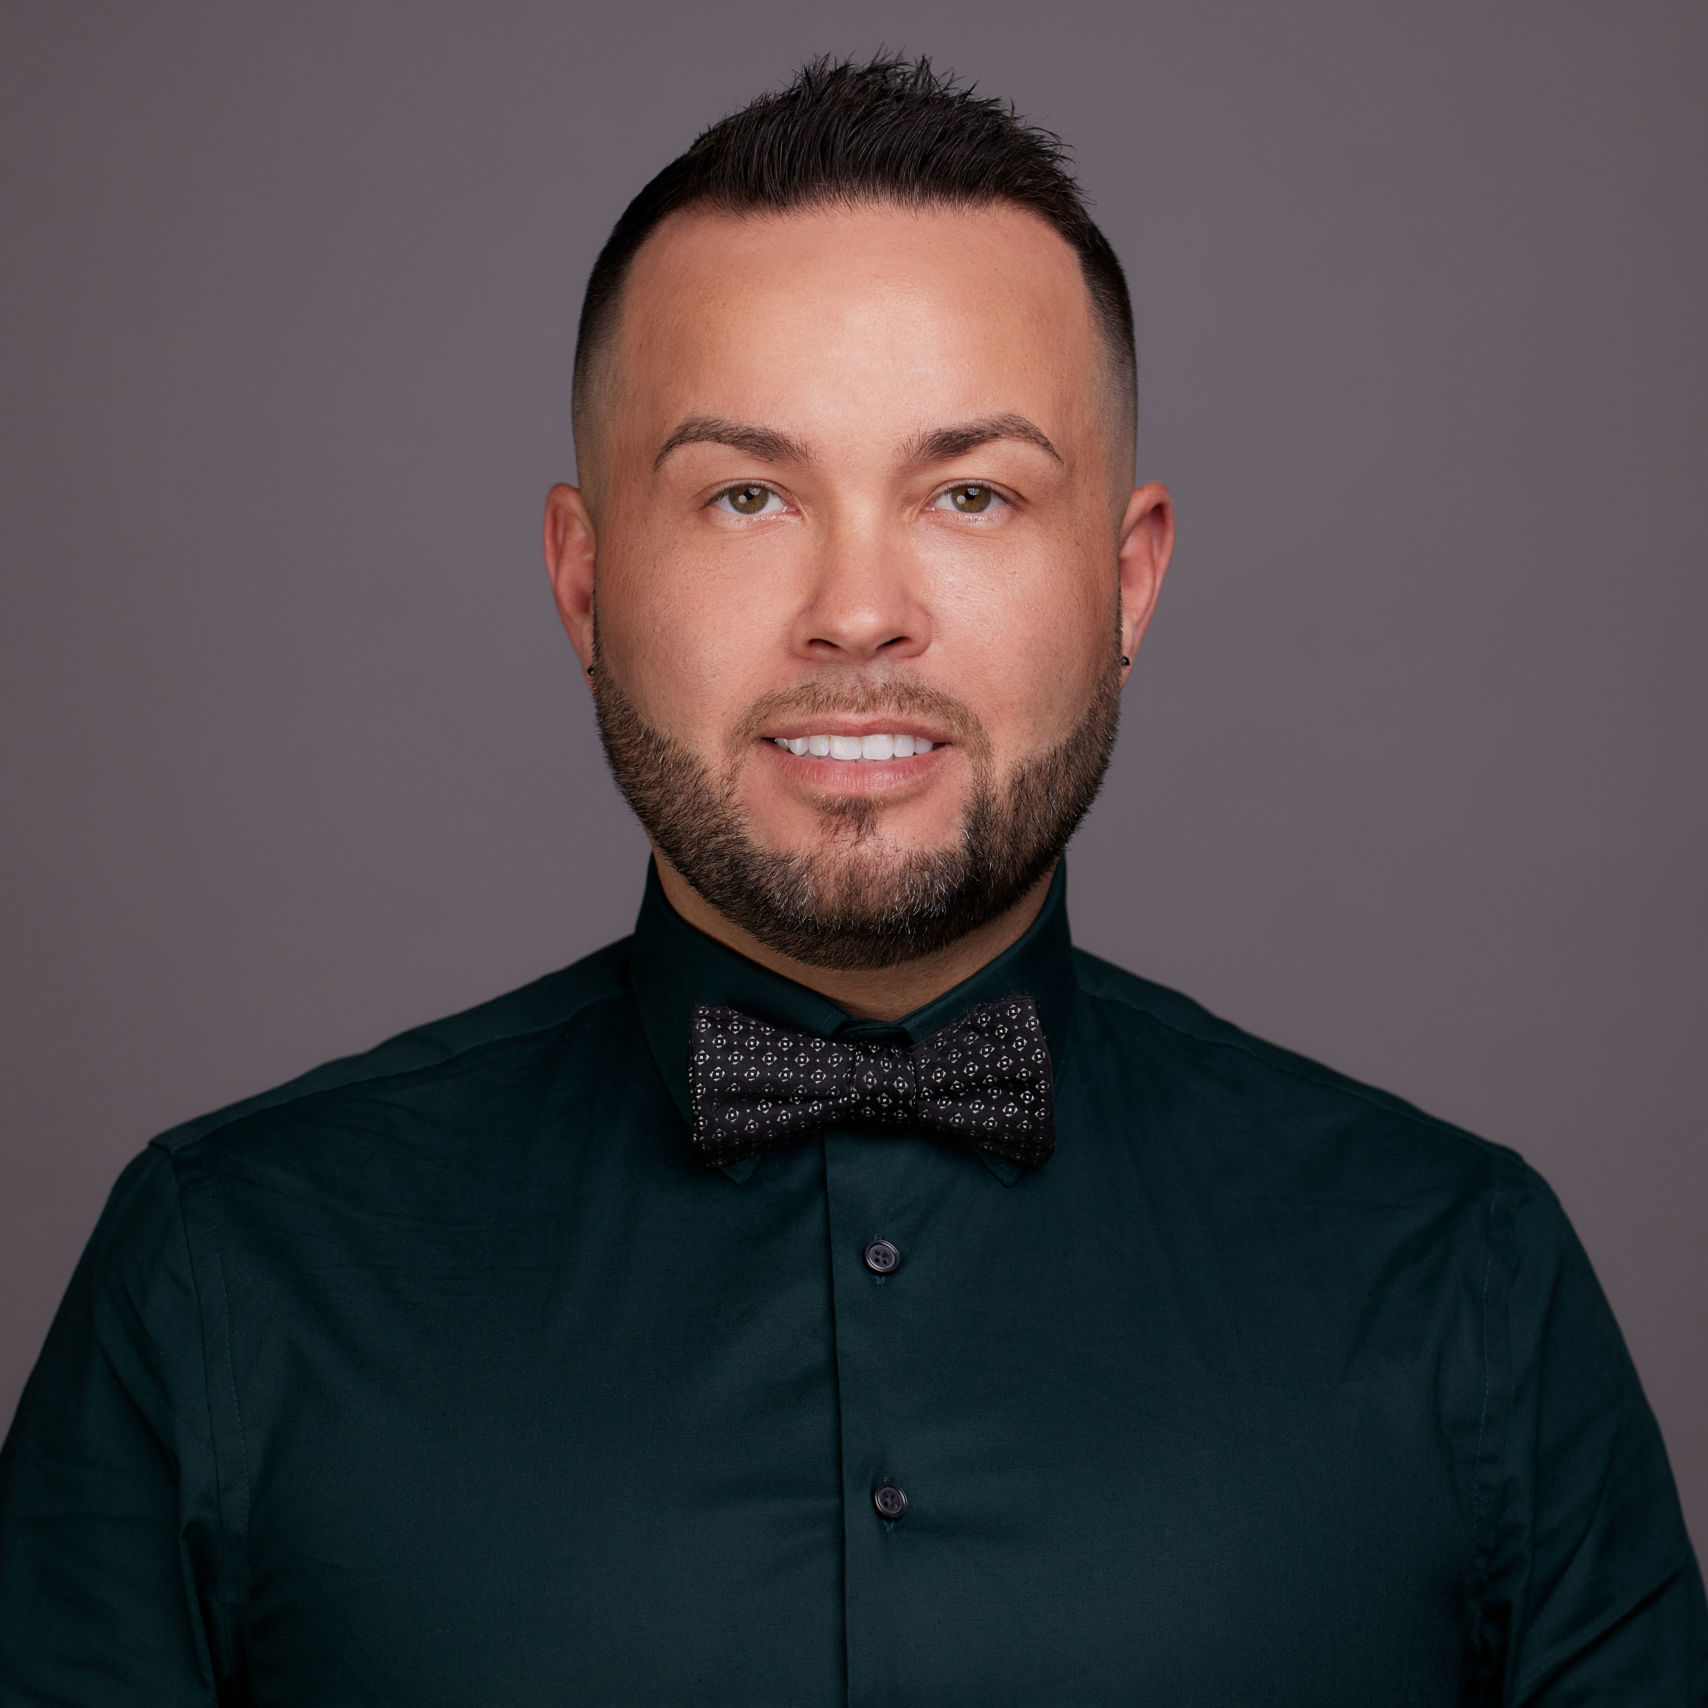 Image shows a headshot of Chase Johnson, new principal at Muchin College Prep. He is a young man with short brown hair and a short beard. He is wearing a long sleeved black button up. The background is a solid gray color.